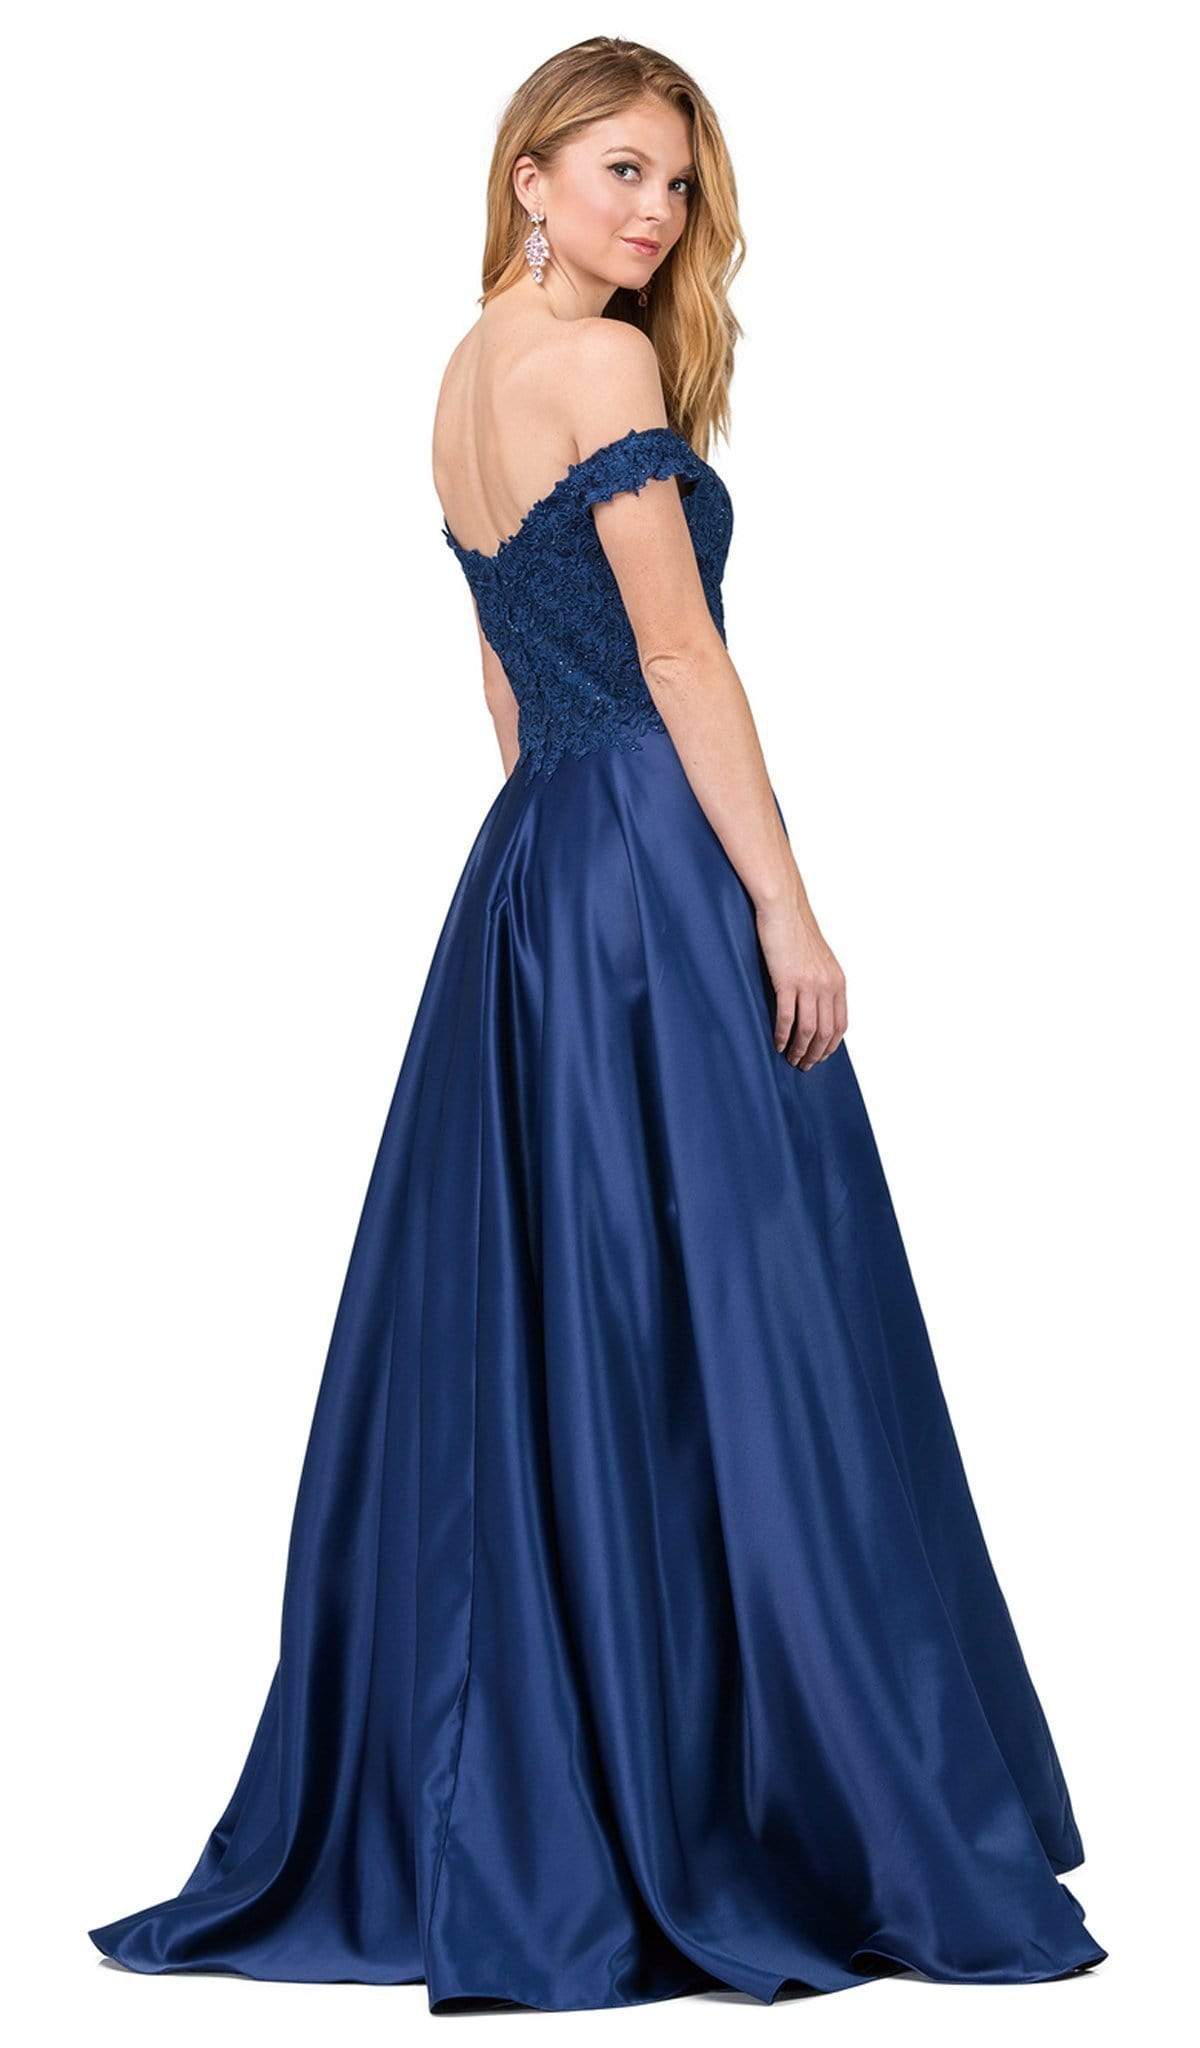 Dancing Queen - 2355 Embroidered Off Shoulder A-Line Prom Gown Special Occasion Dress